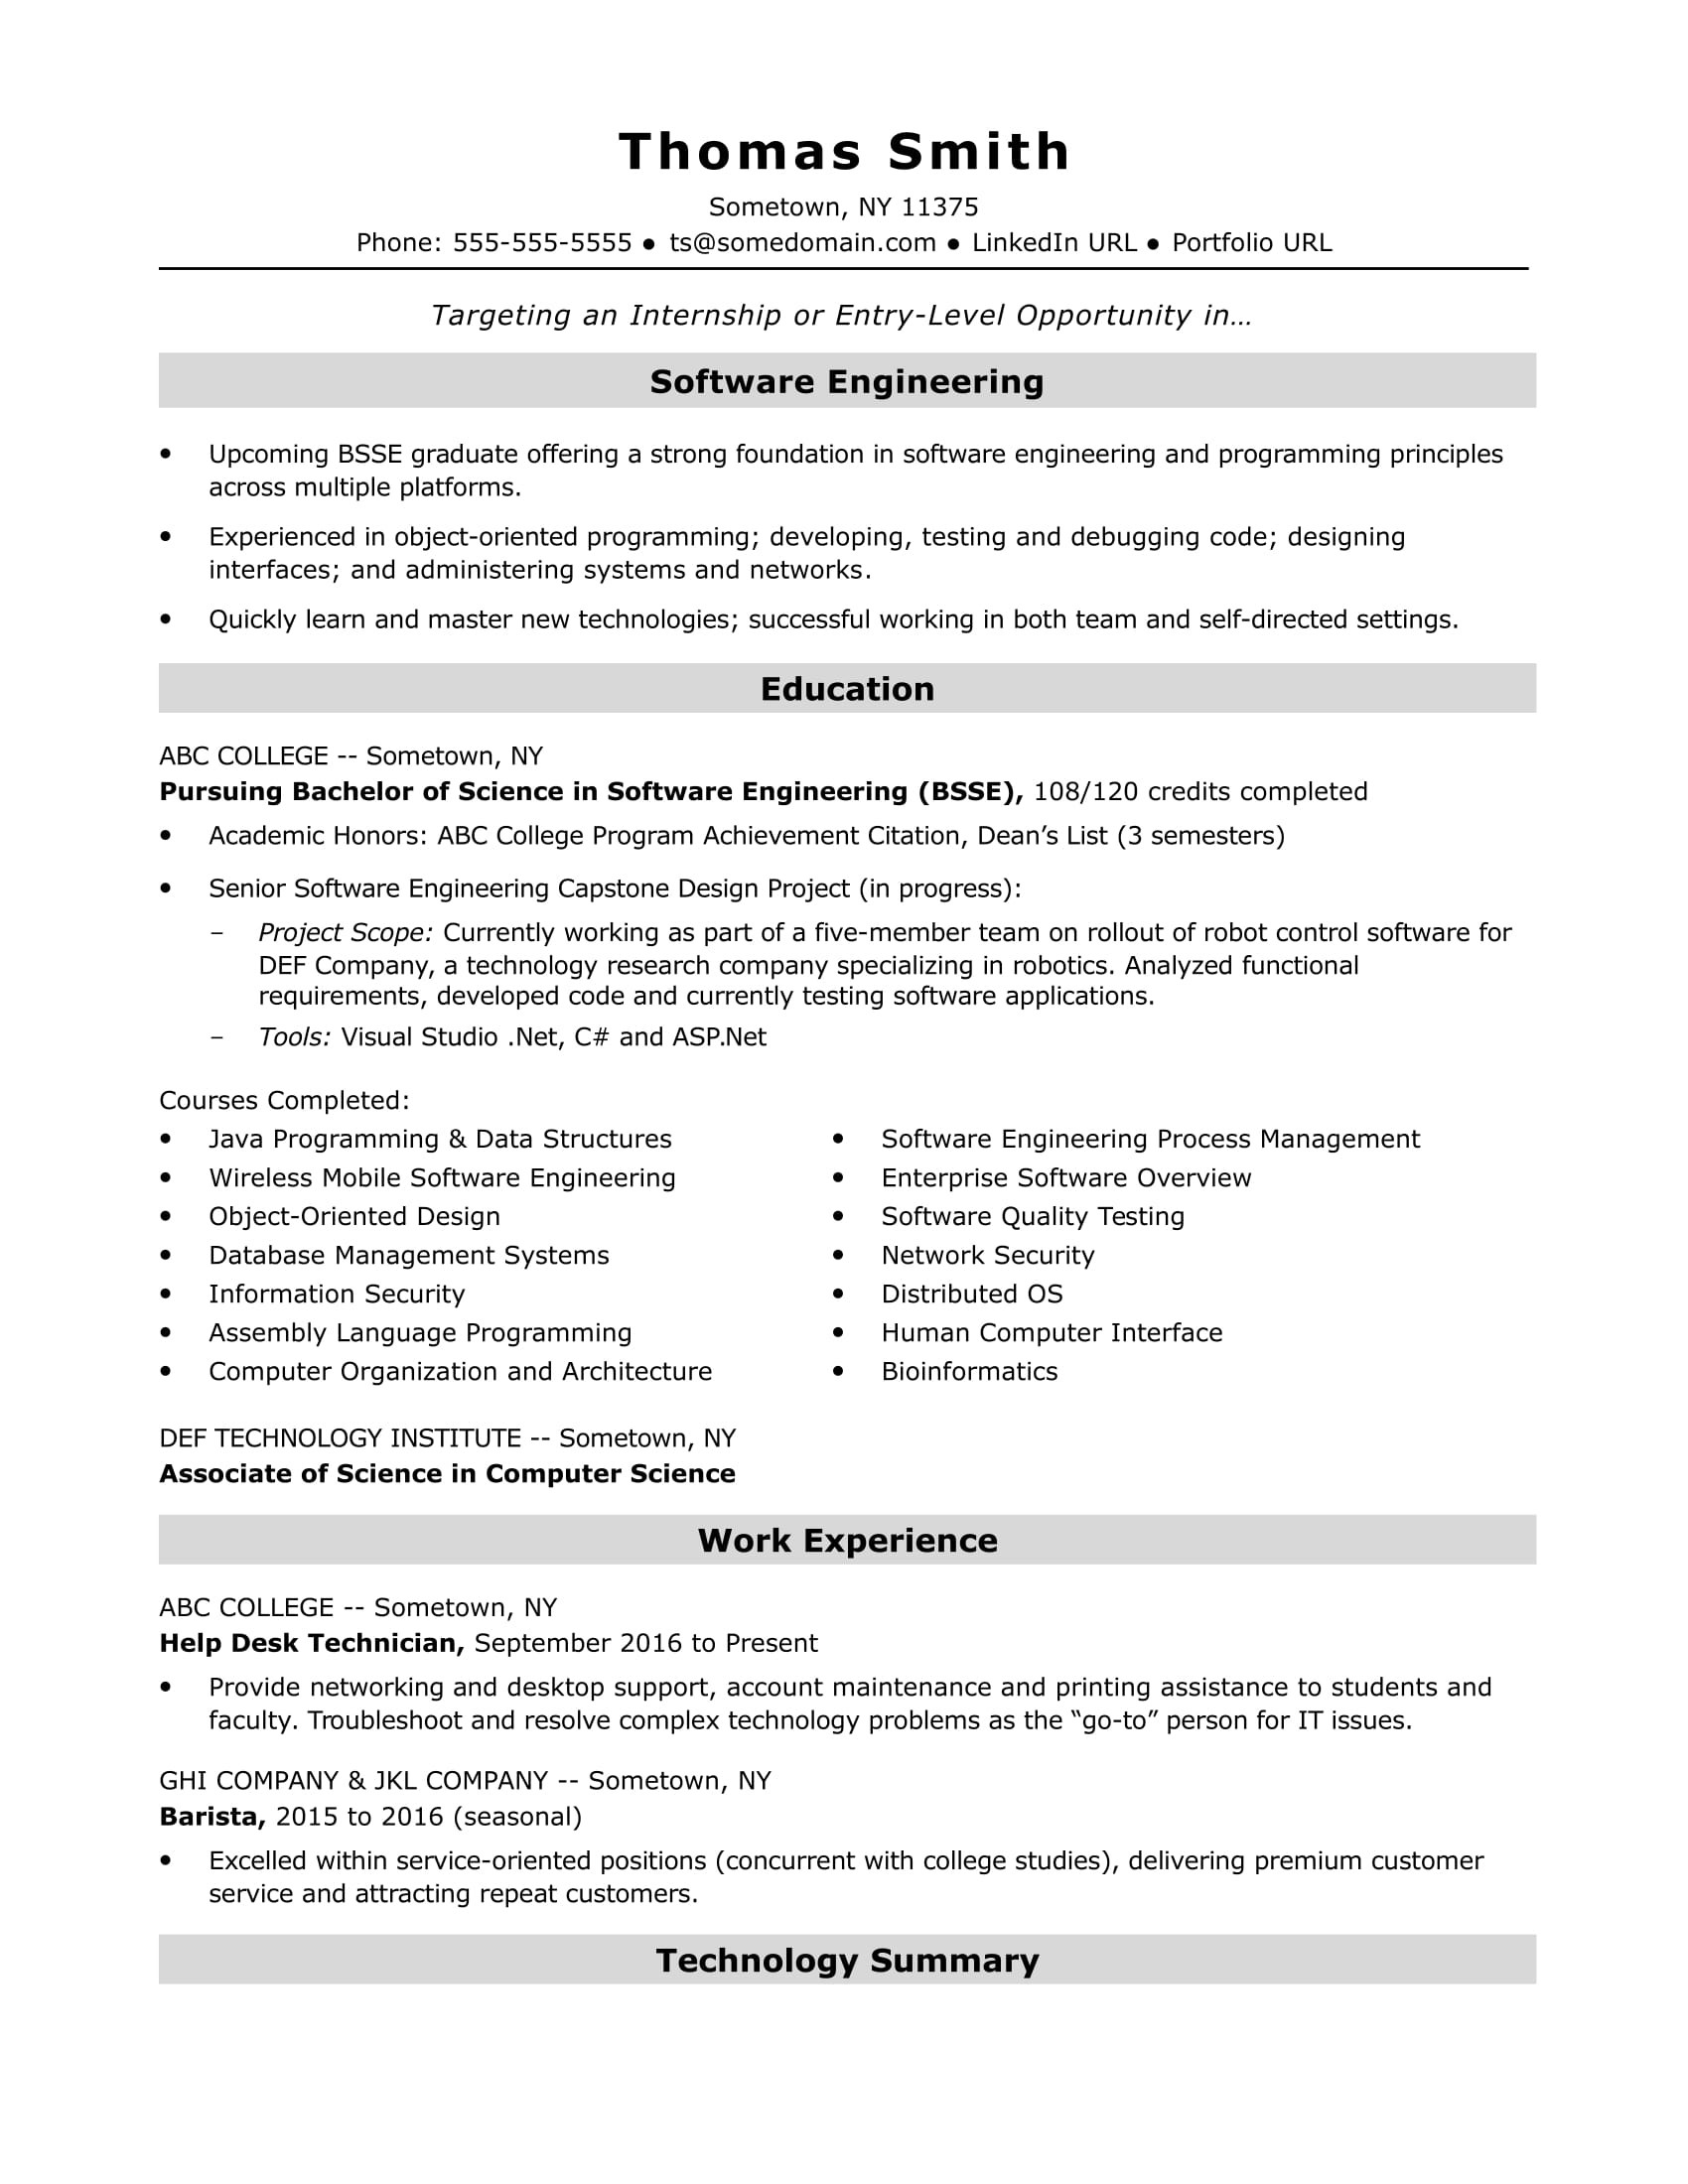 Sample Of A Good Computer Science Resume with No Experience Entry-level software Engineer Resume Sample Monster.com